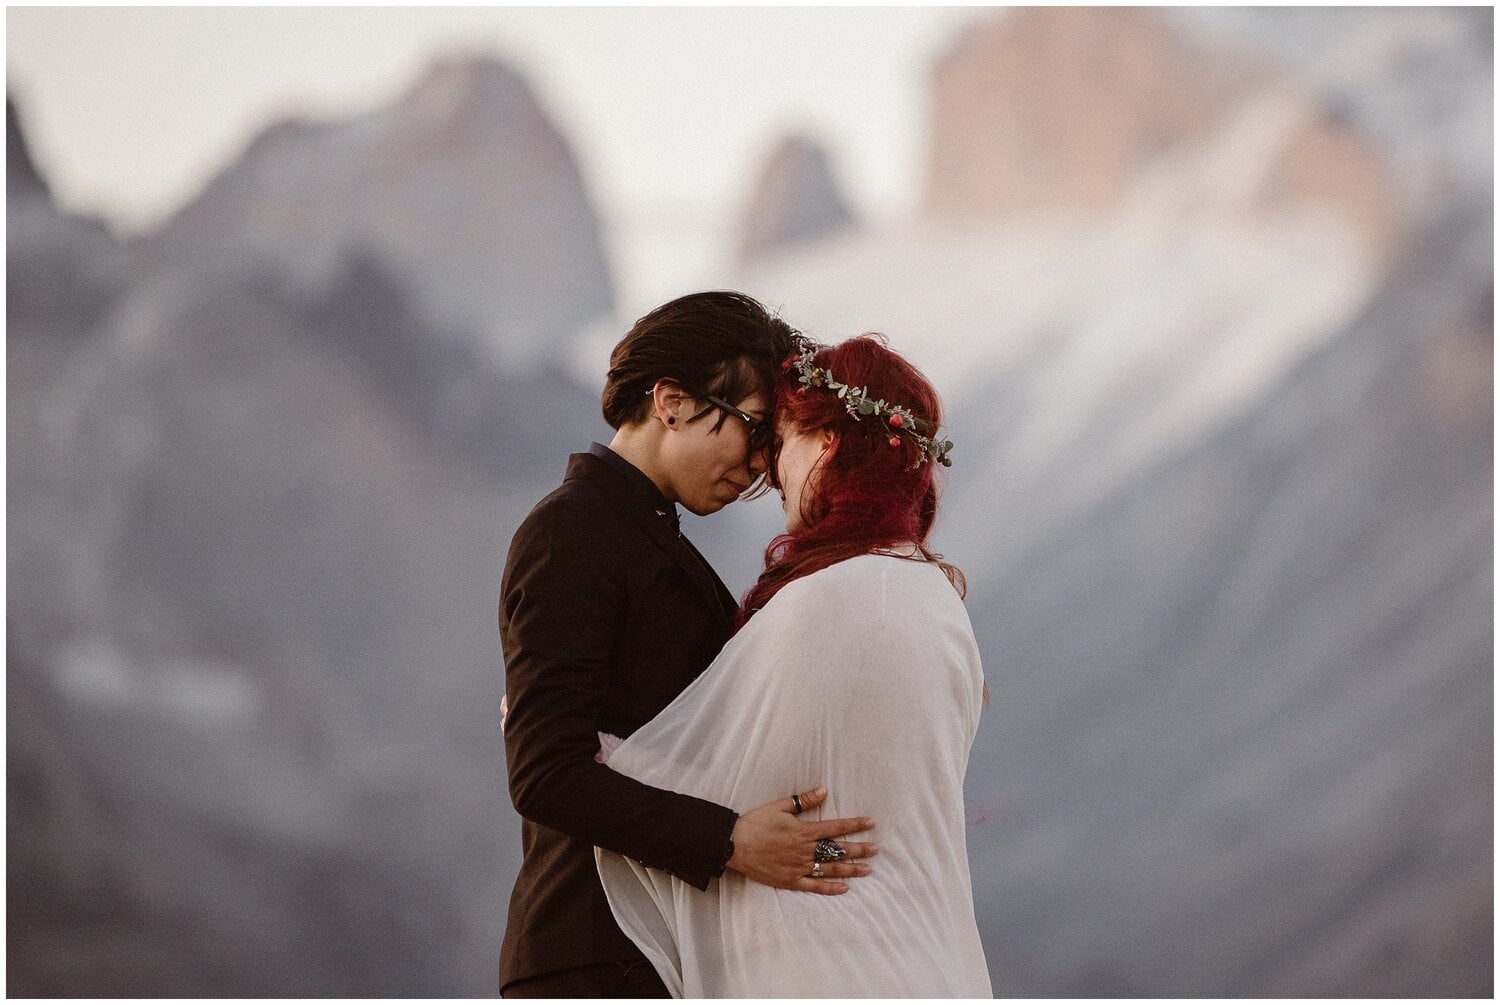 Couple embraces on their wedding day in Patagonia.